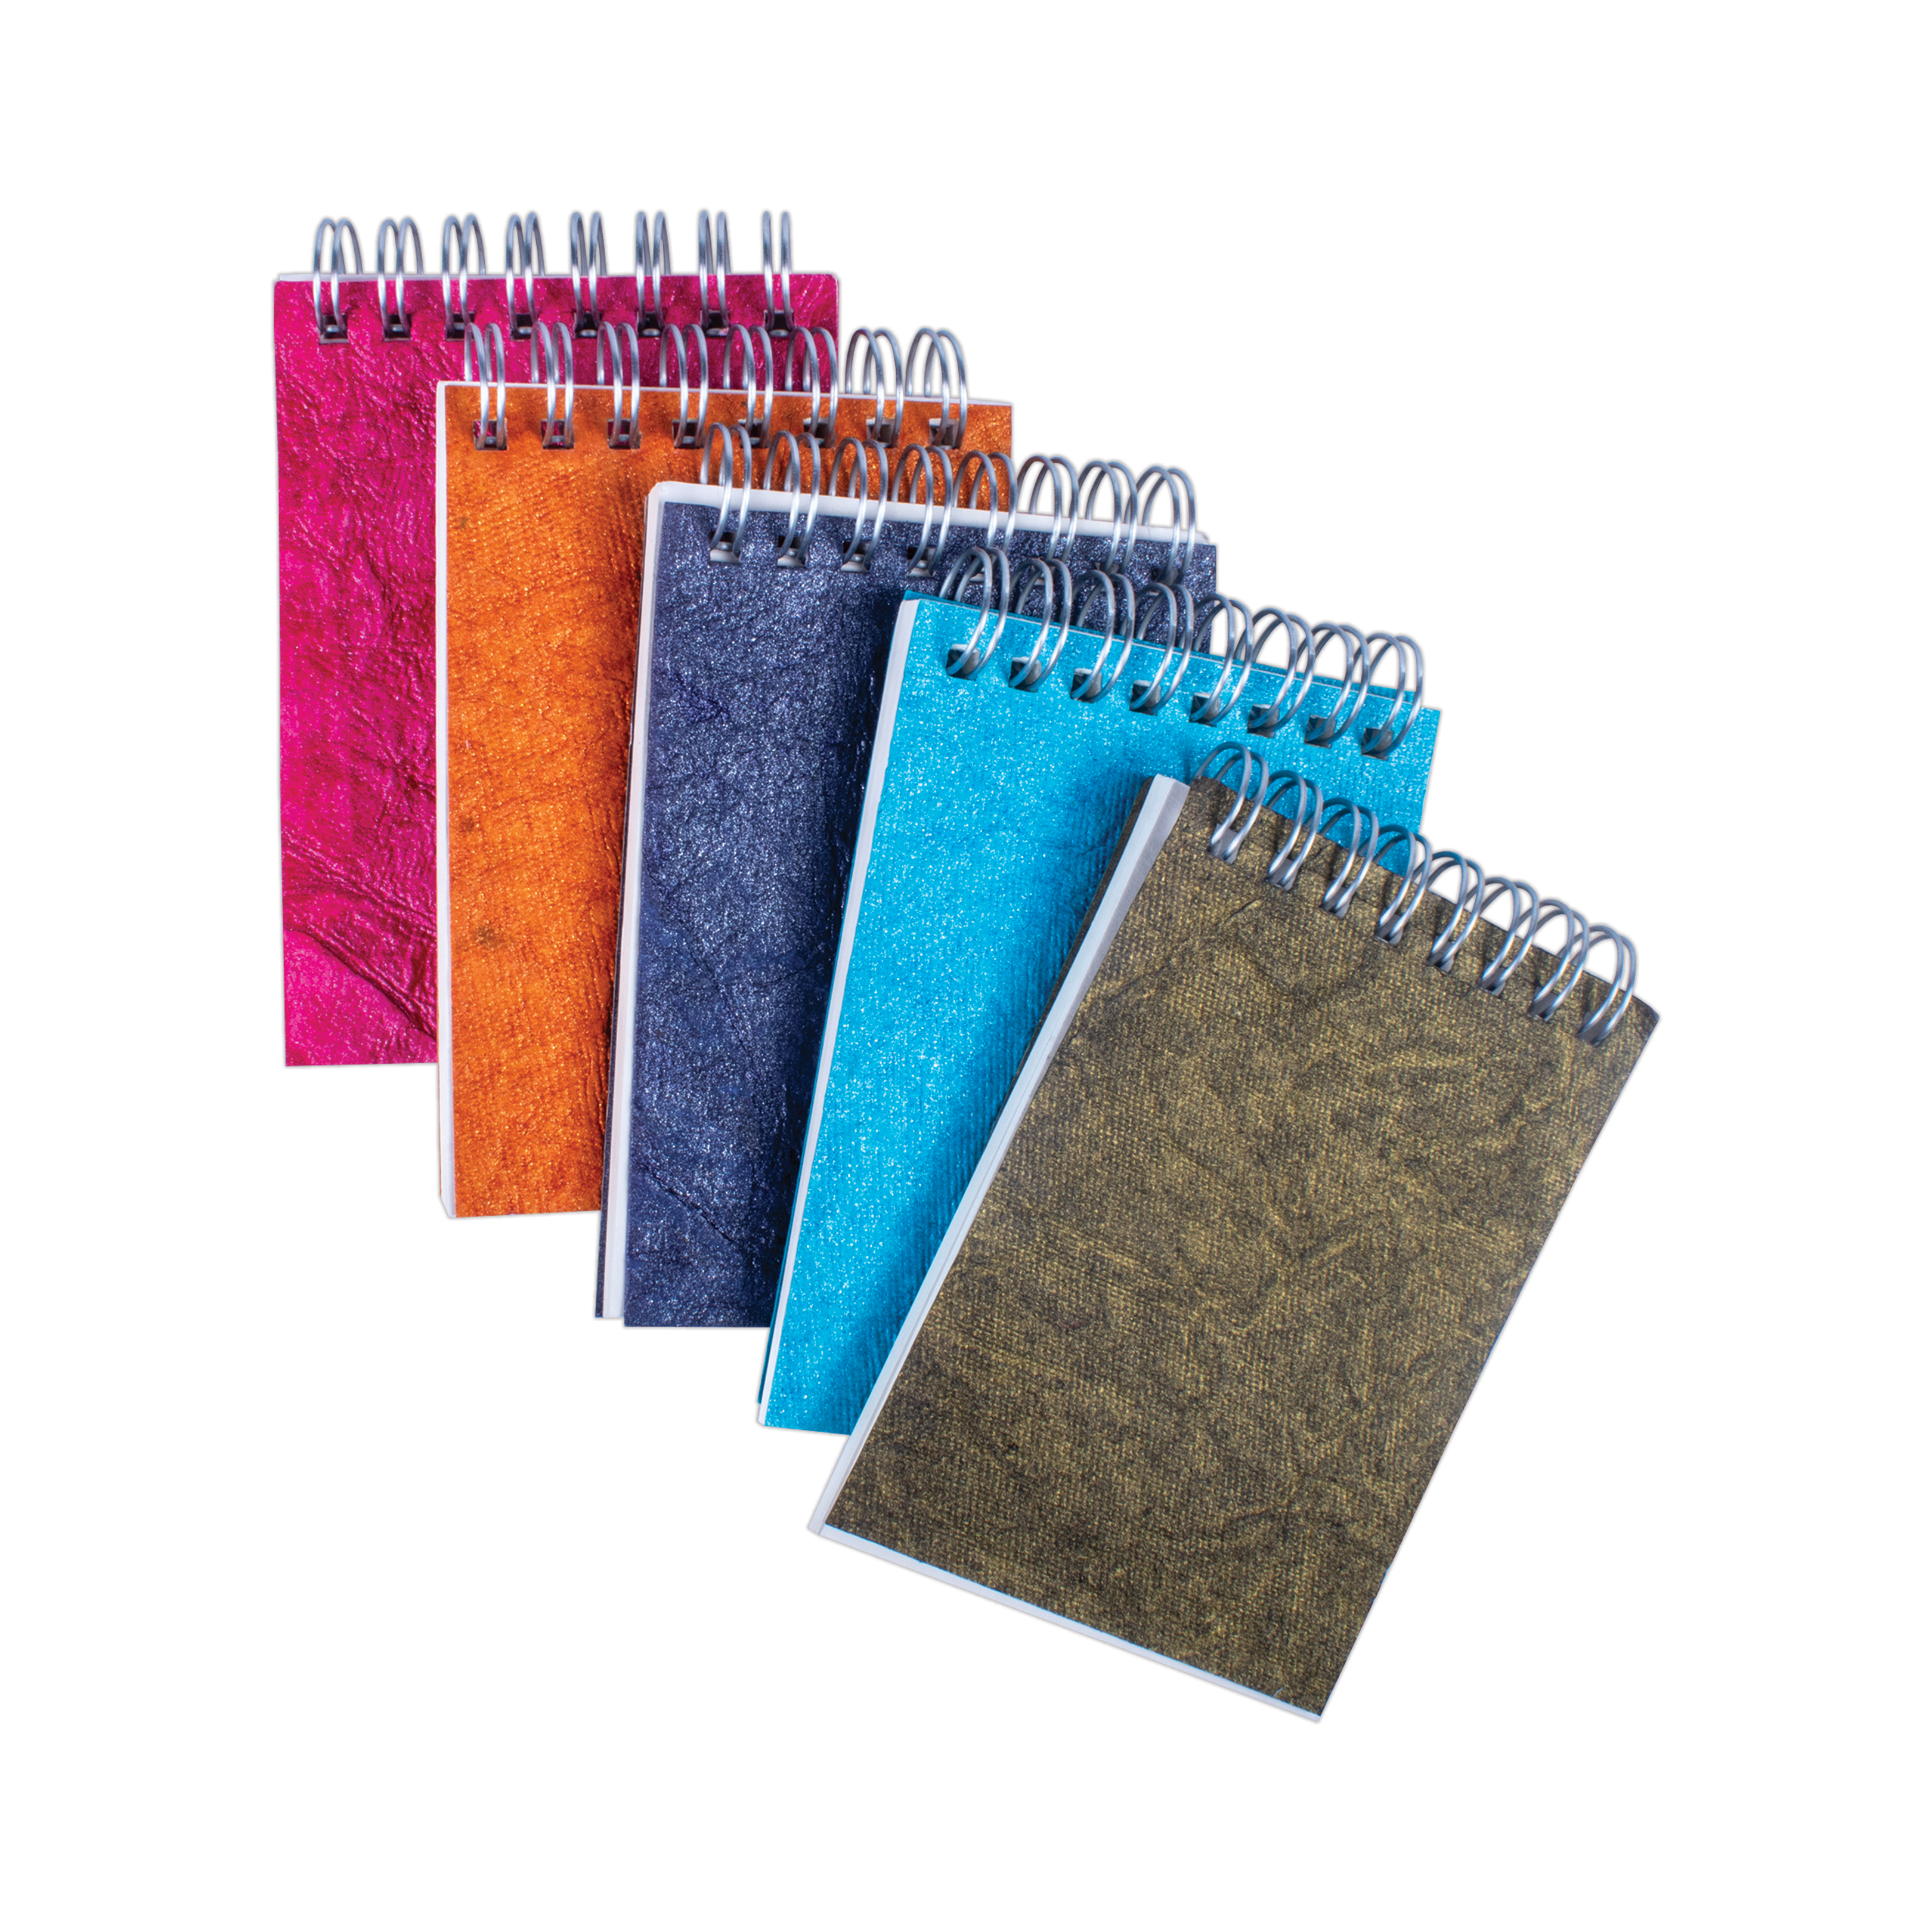 Simply Chic Spiral Bound Sketchbook Set with Assorted Leather Paper Cover | 7.5 X 10.5cm | 115gsm - 40Pages - Pack of 5